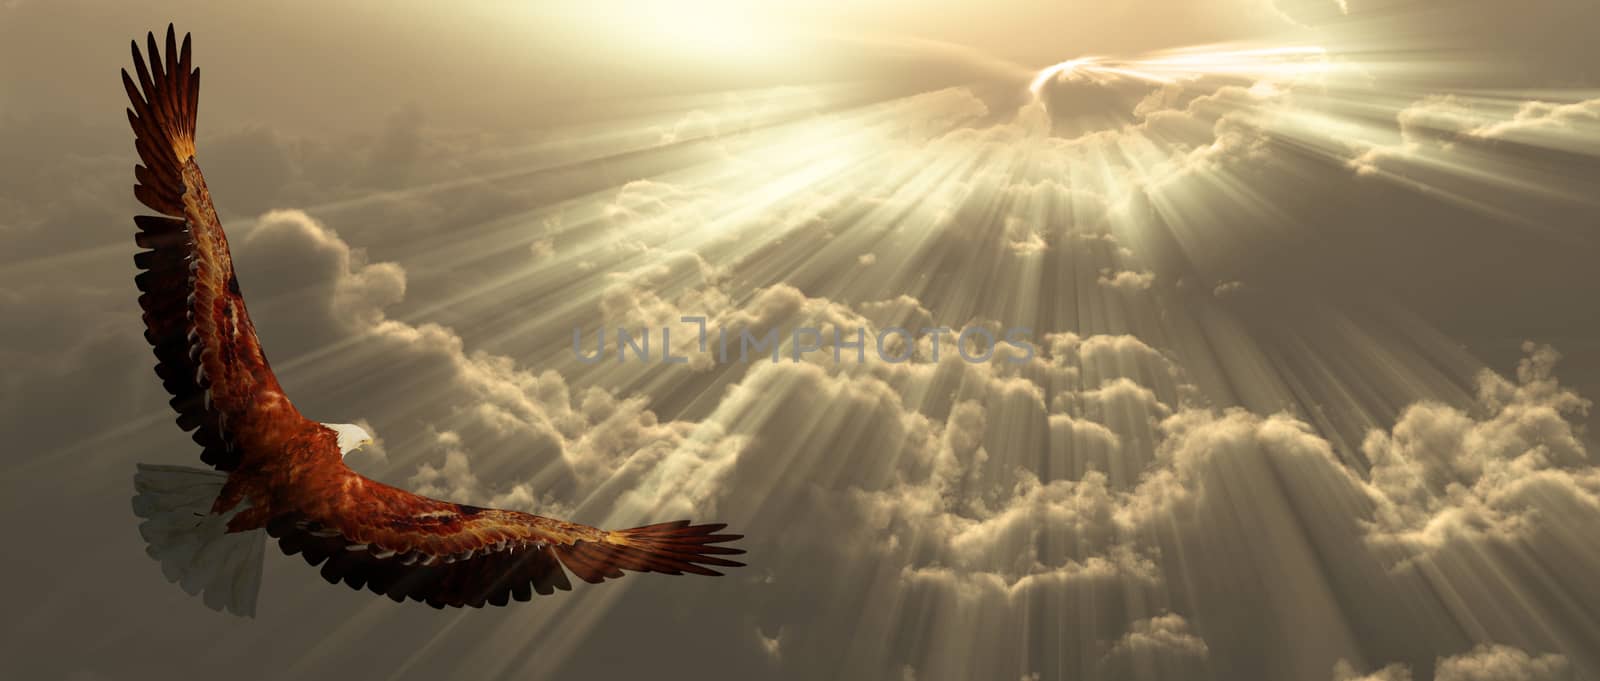 Eagle in flight above the clouds. Sunset or sunrise